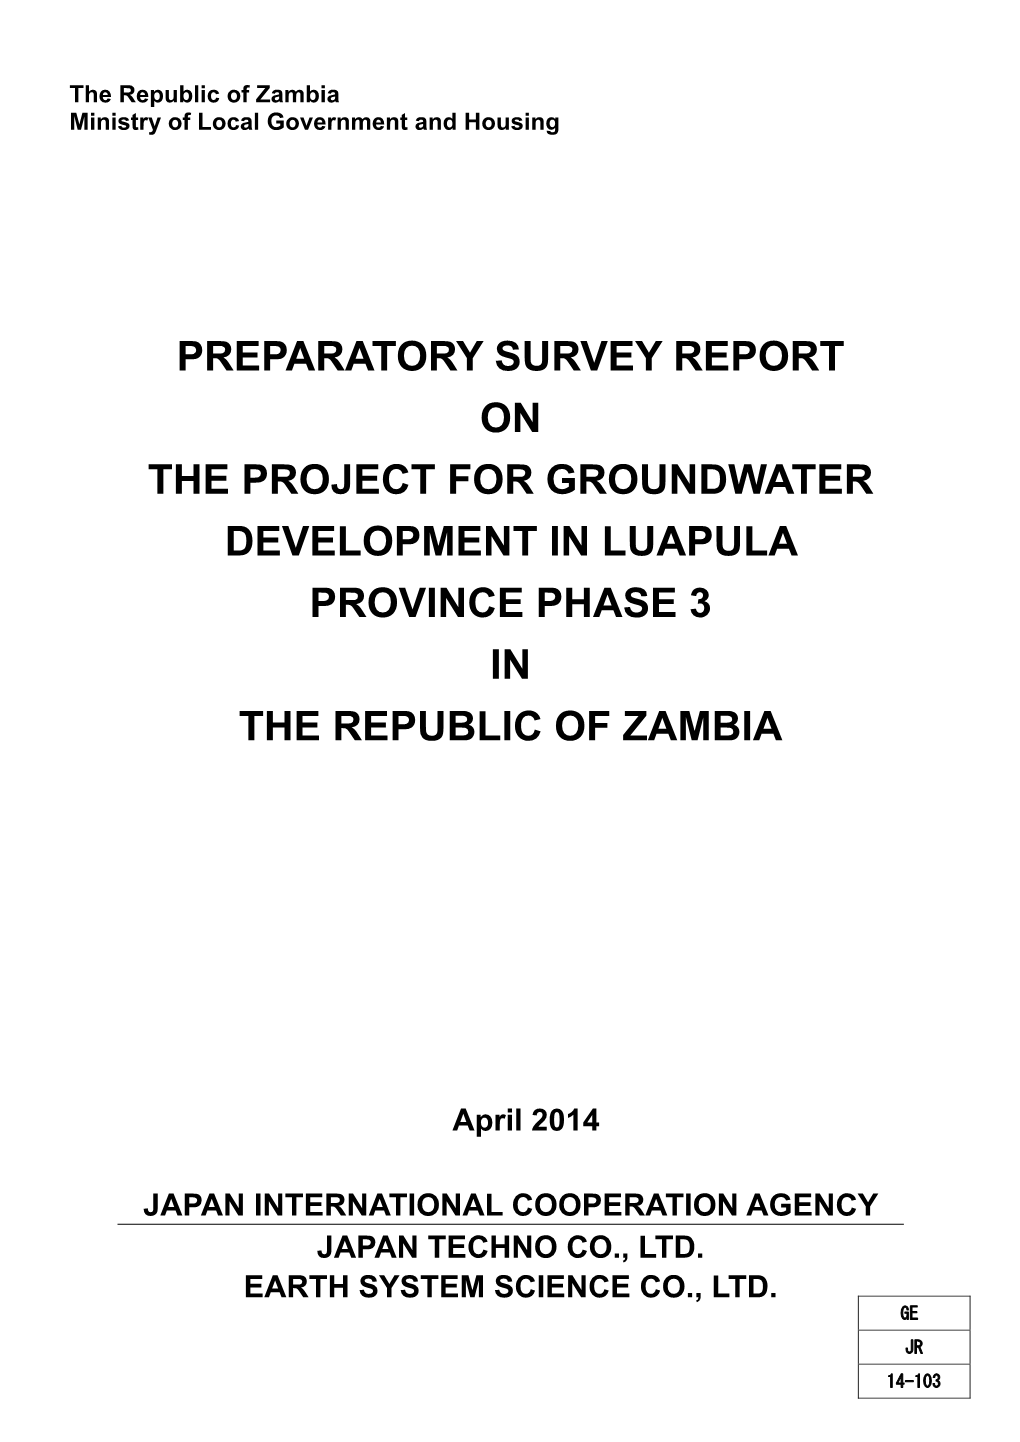 Preparatory Survey Report on the Project for Groundwater Development in Luapula Province Phase 3 in the Republic of Zambia